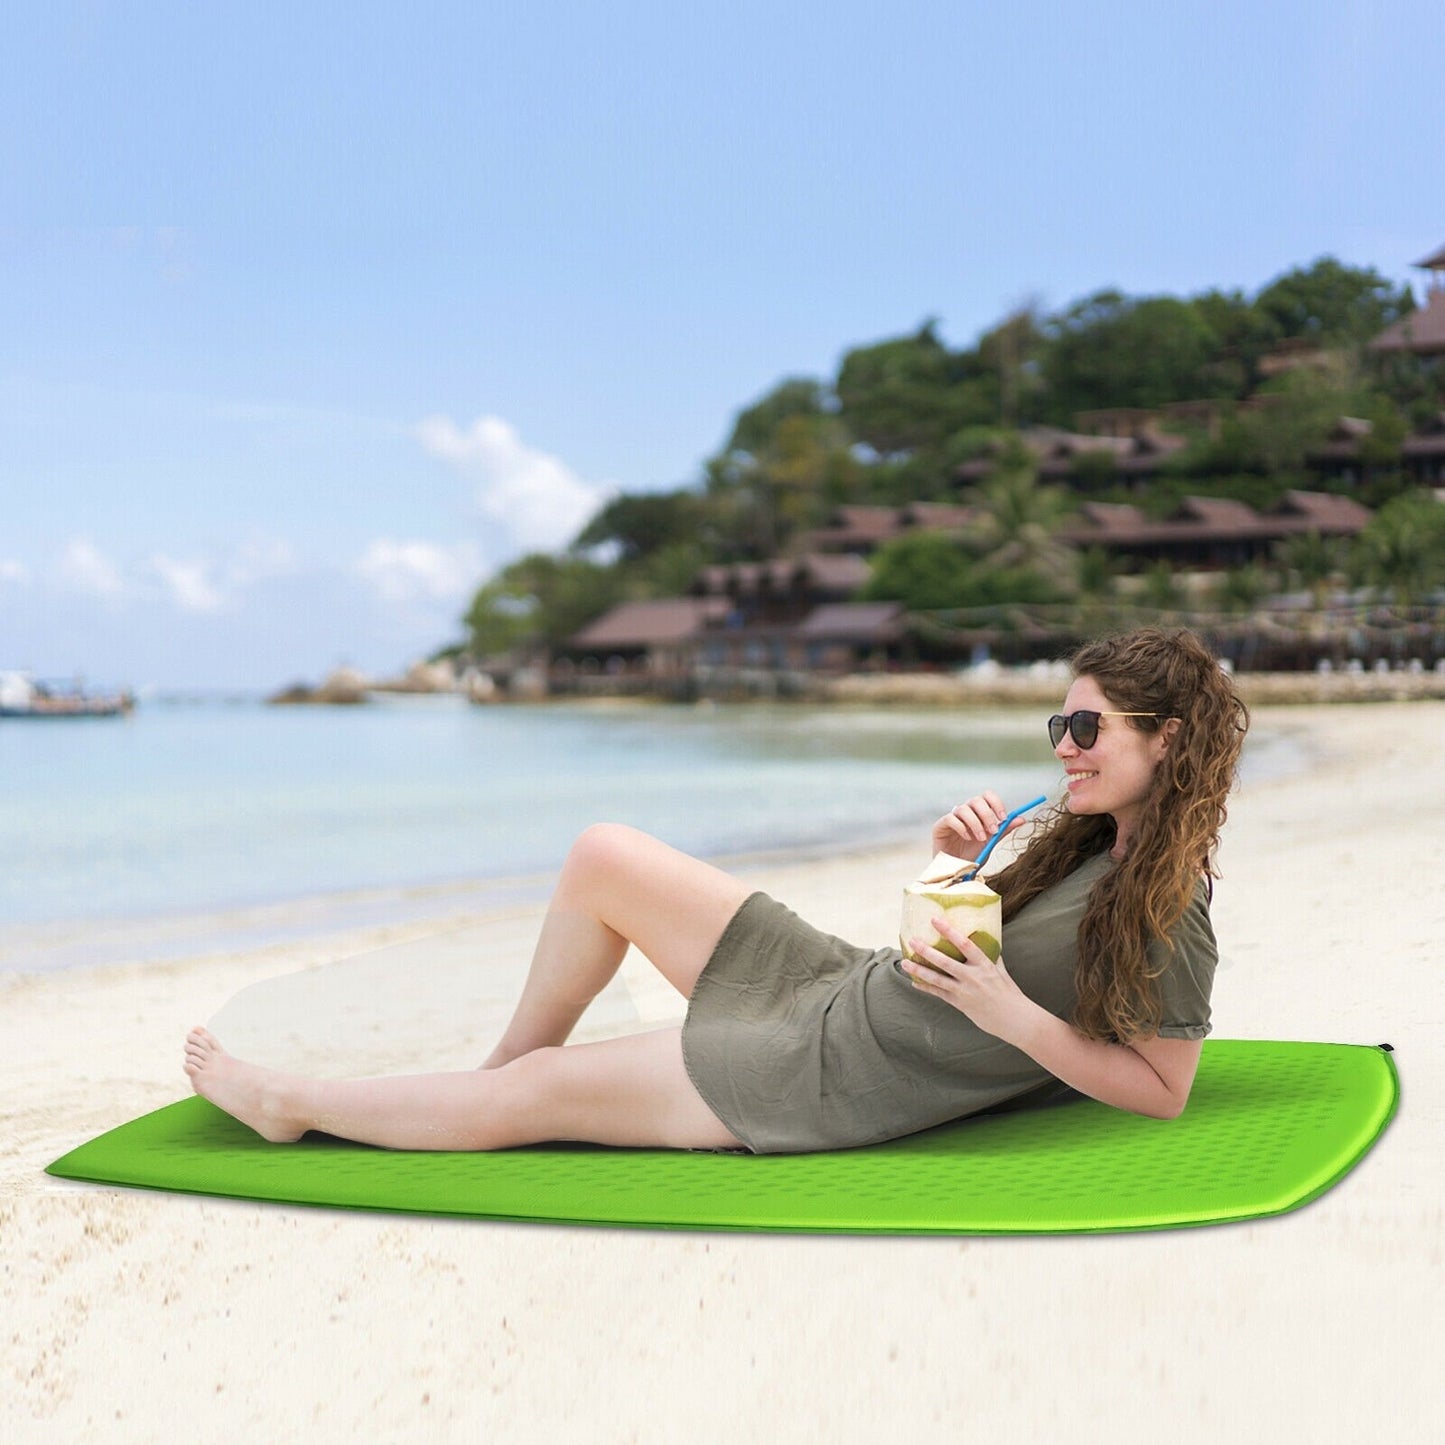 Inflatable Sleeping Pad with Carrying Bag, Green